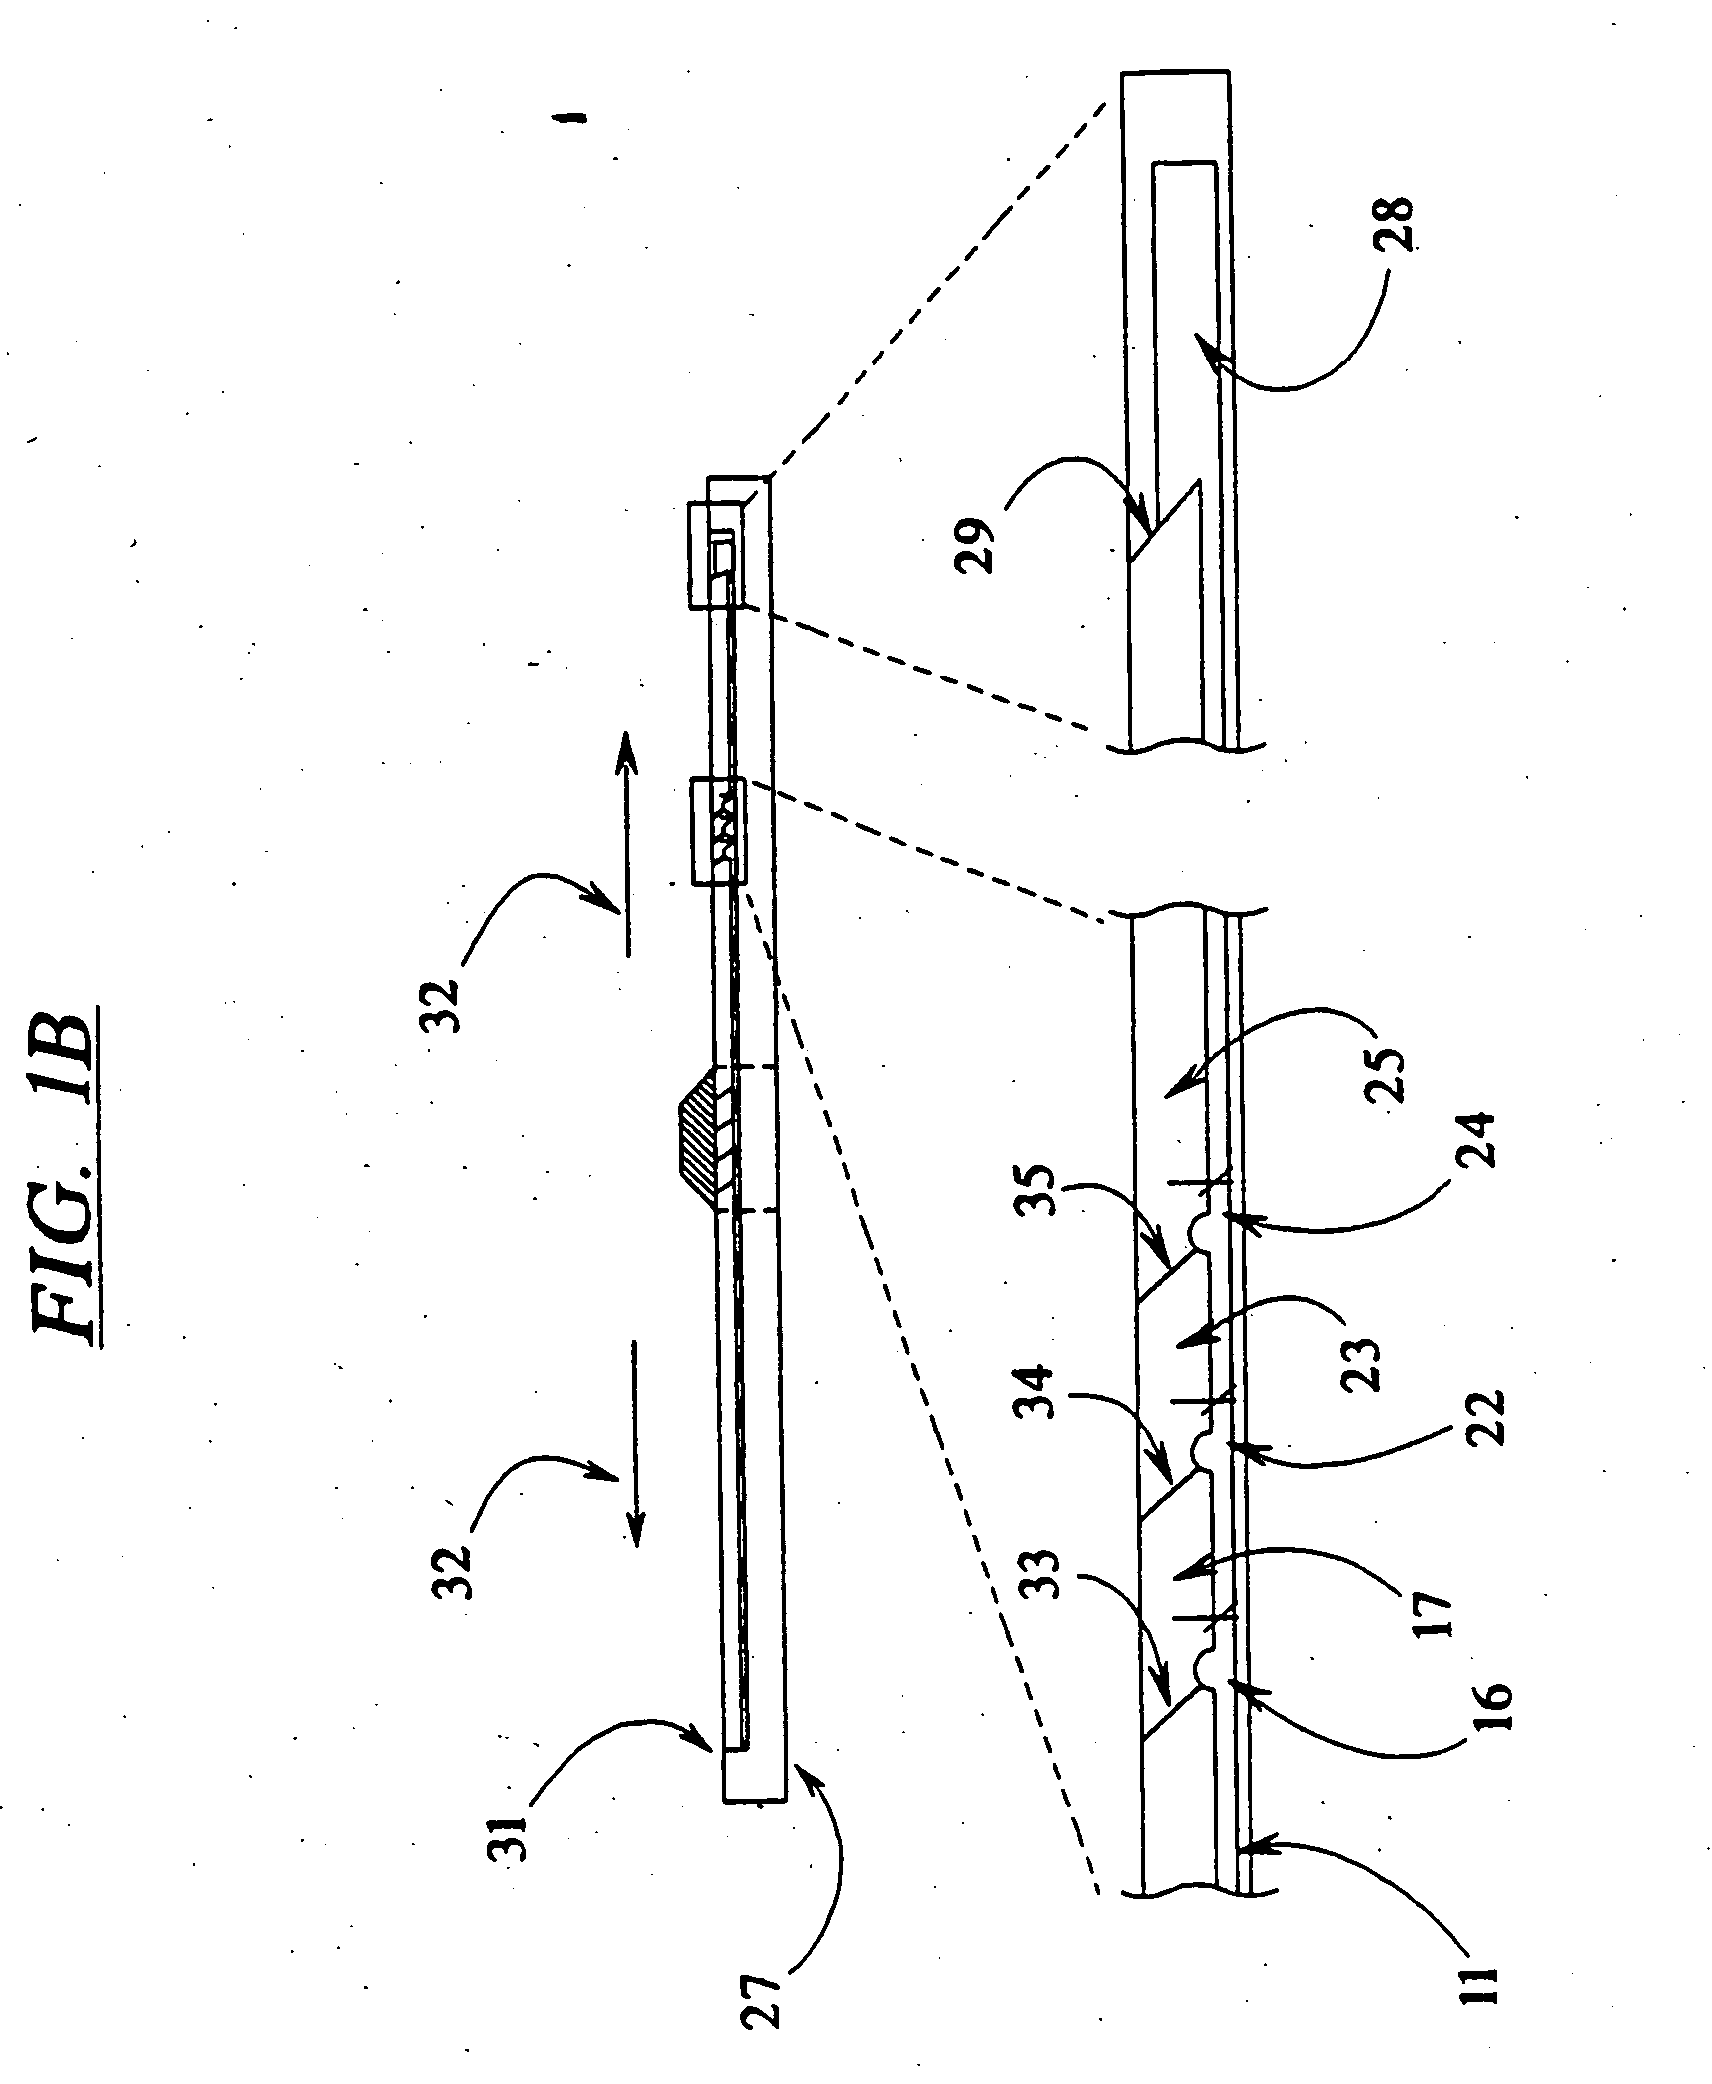 Devices and methods for using centripetal acceleration to drive fluid movement in a microfluidics system